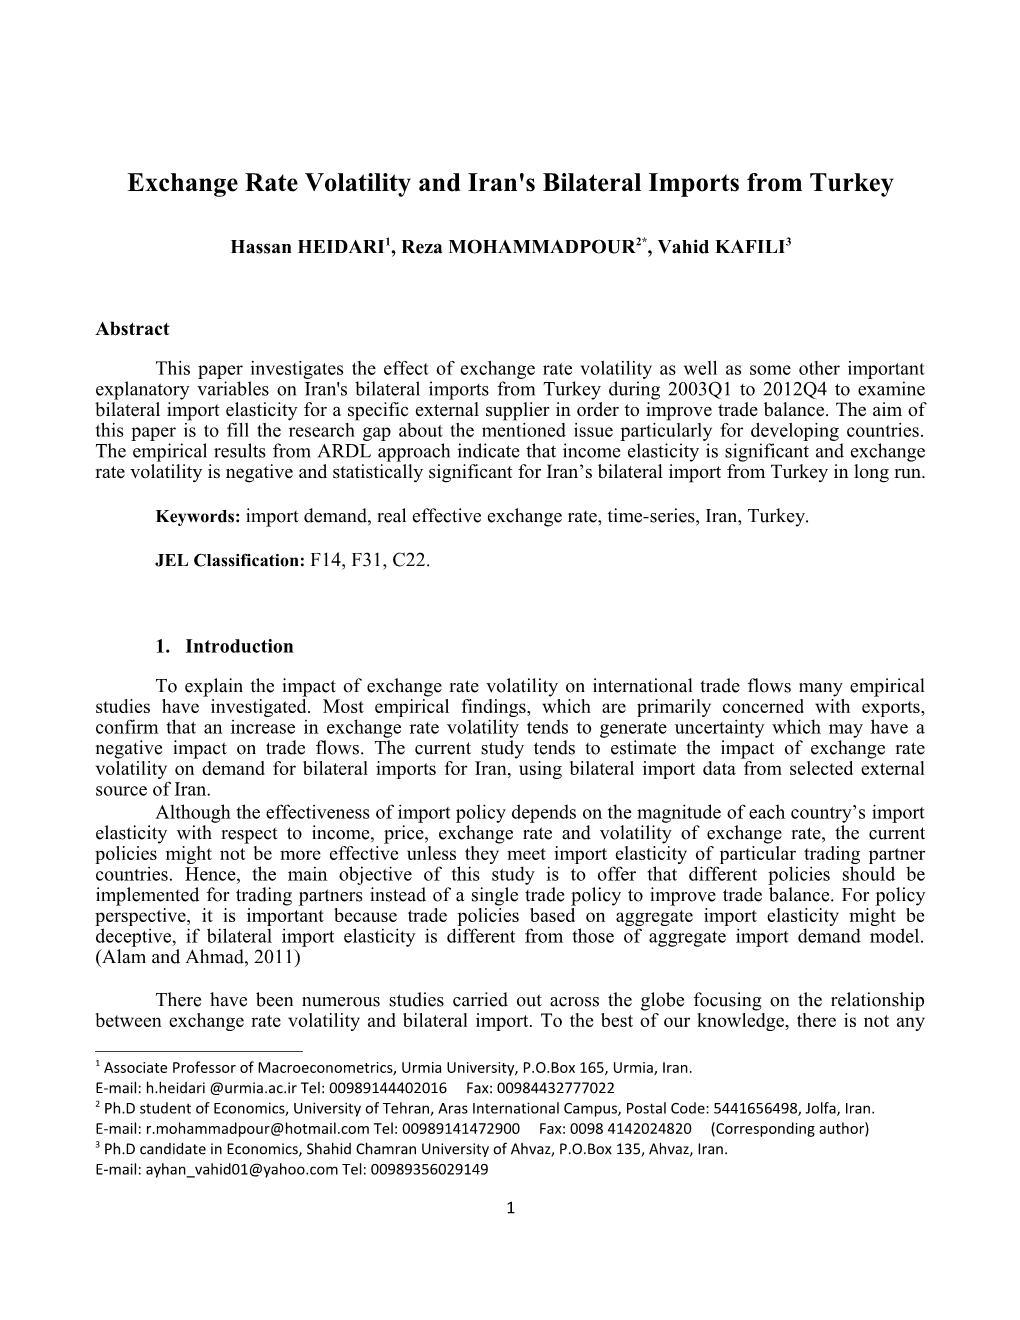 Exchange Rate Volatility and Iran's Bilateral Imports from Turkey